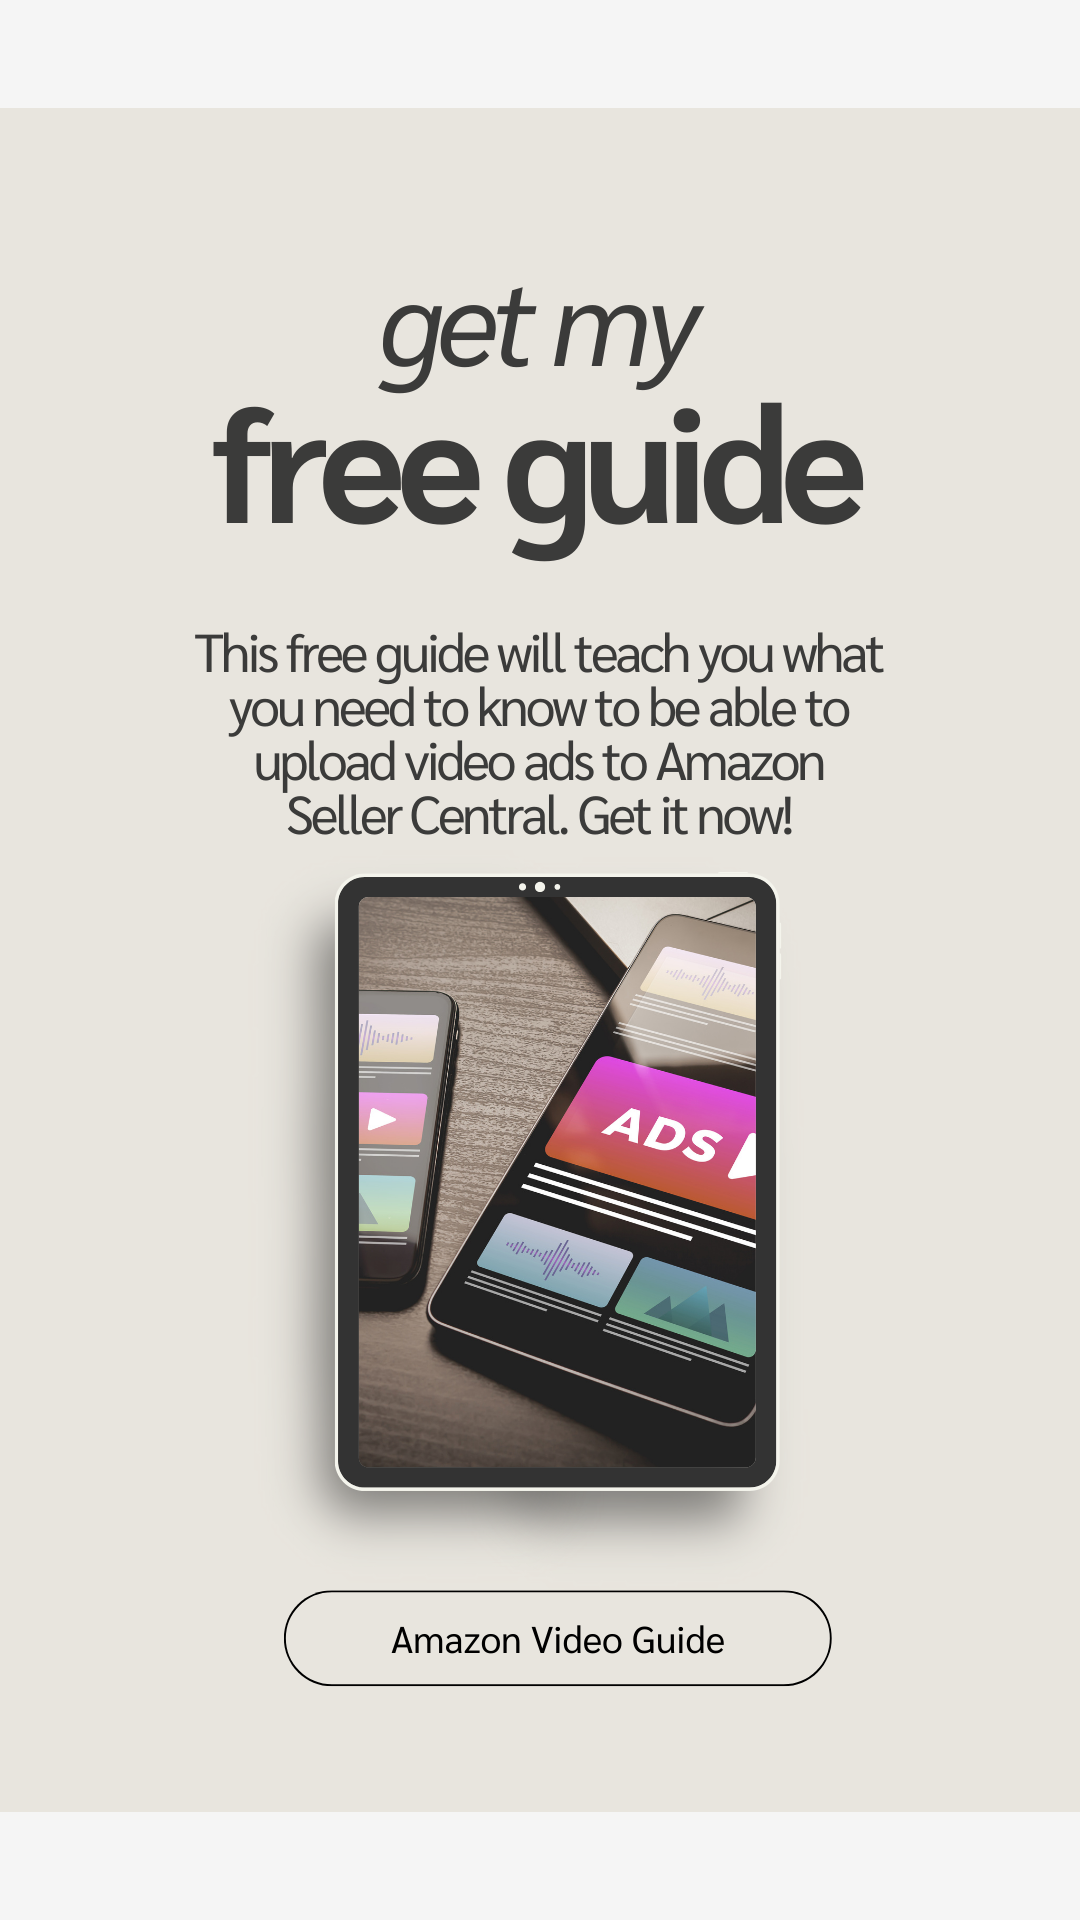 A free guide will teach you what you need to know to be able to upload video ads to amazon seller central.